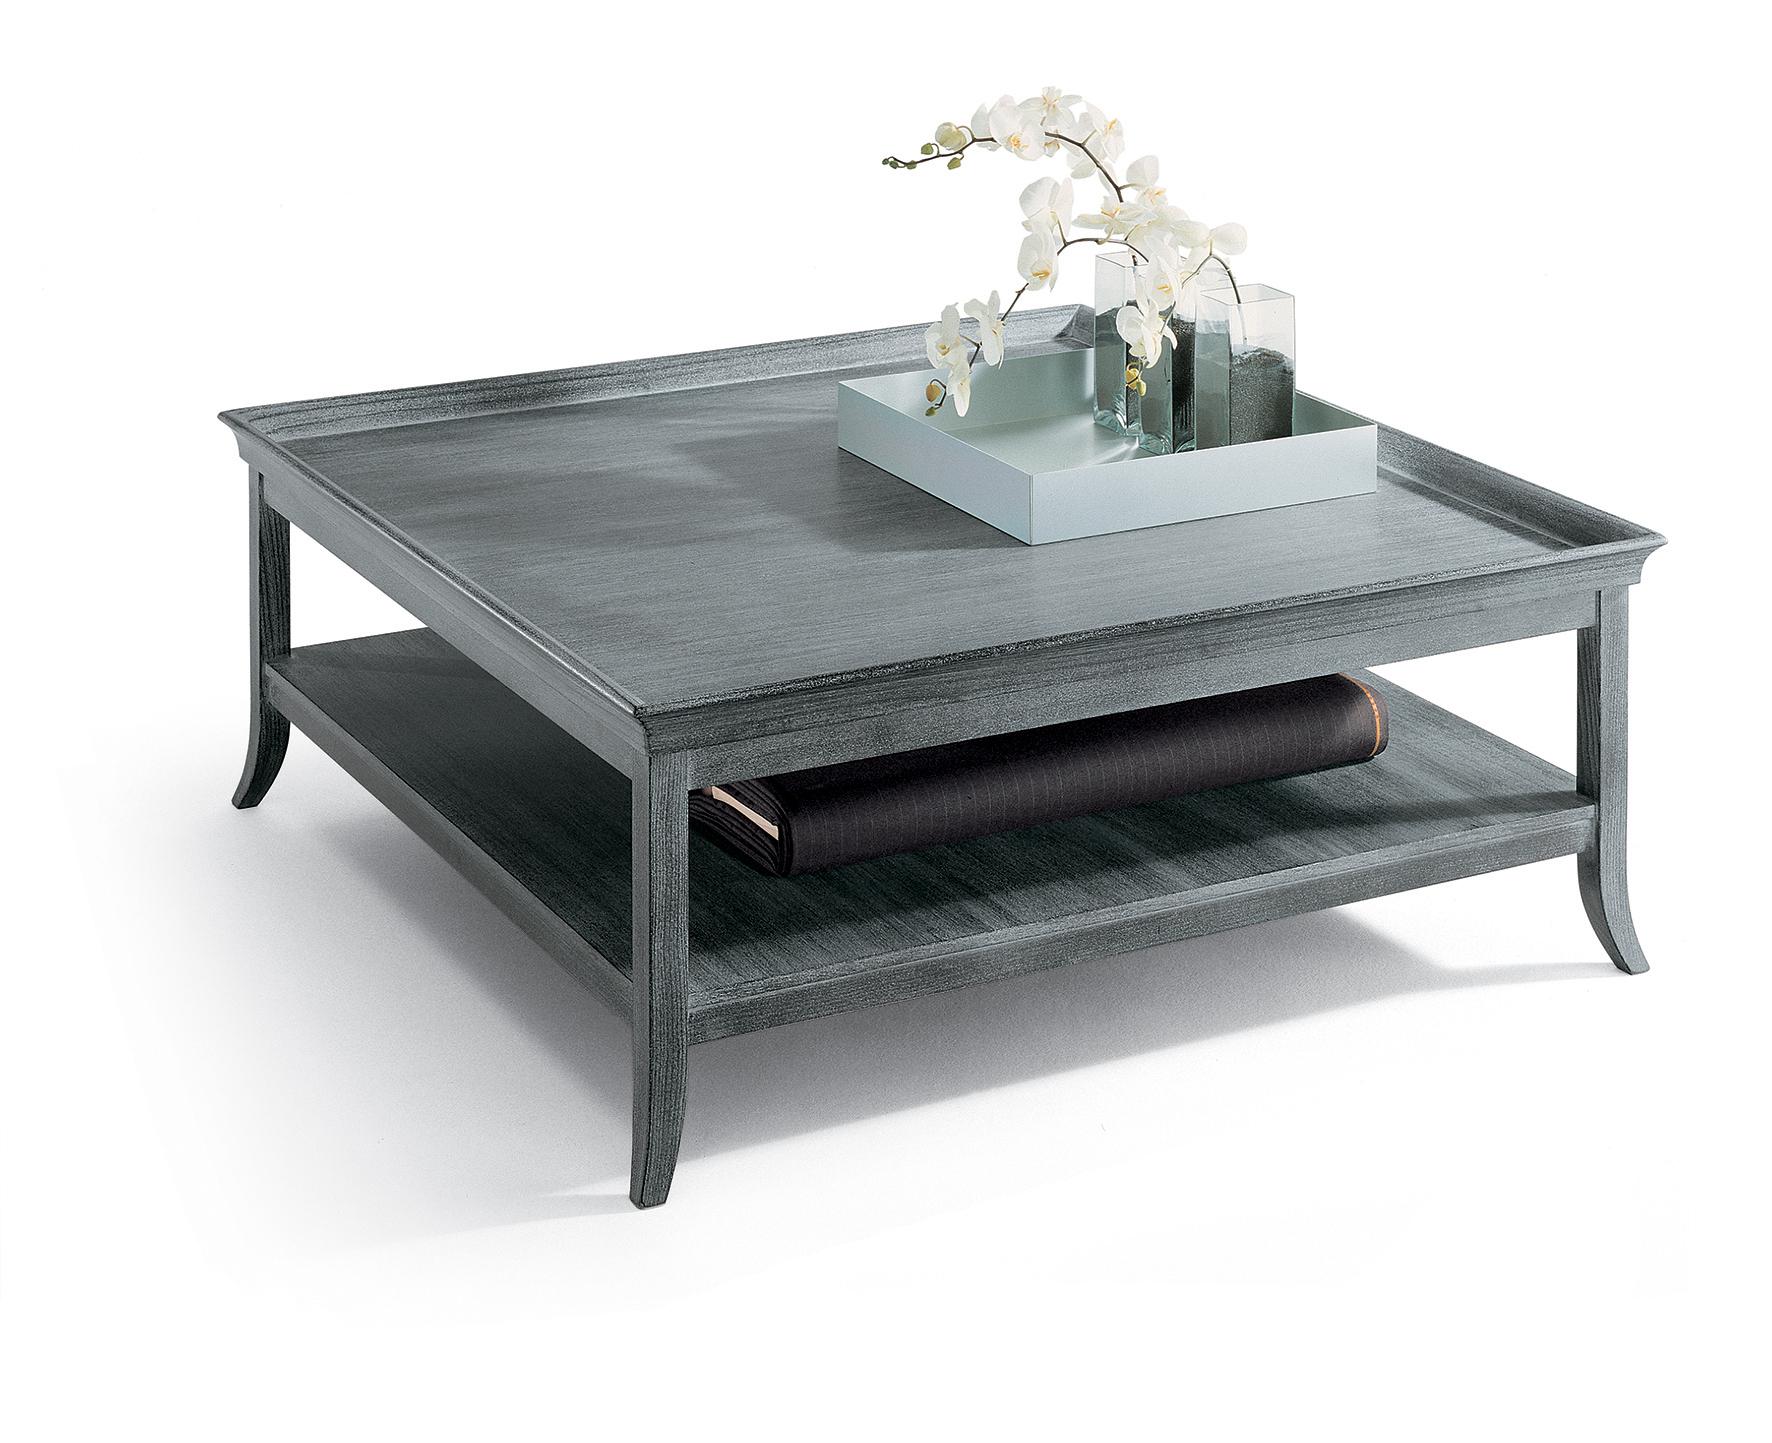 This cocktail table, finished in a sleek 140 dark gray finish, invites you to savor moments of refinement and style in your living space.

Crafted with precision, the Romeo Cocktail Table boasts a solid beech wood structure, ensuring not just visual